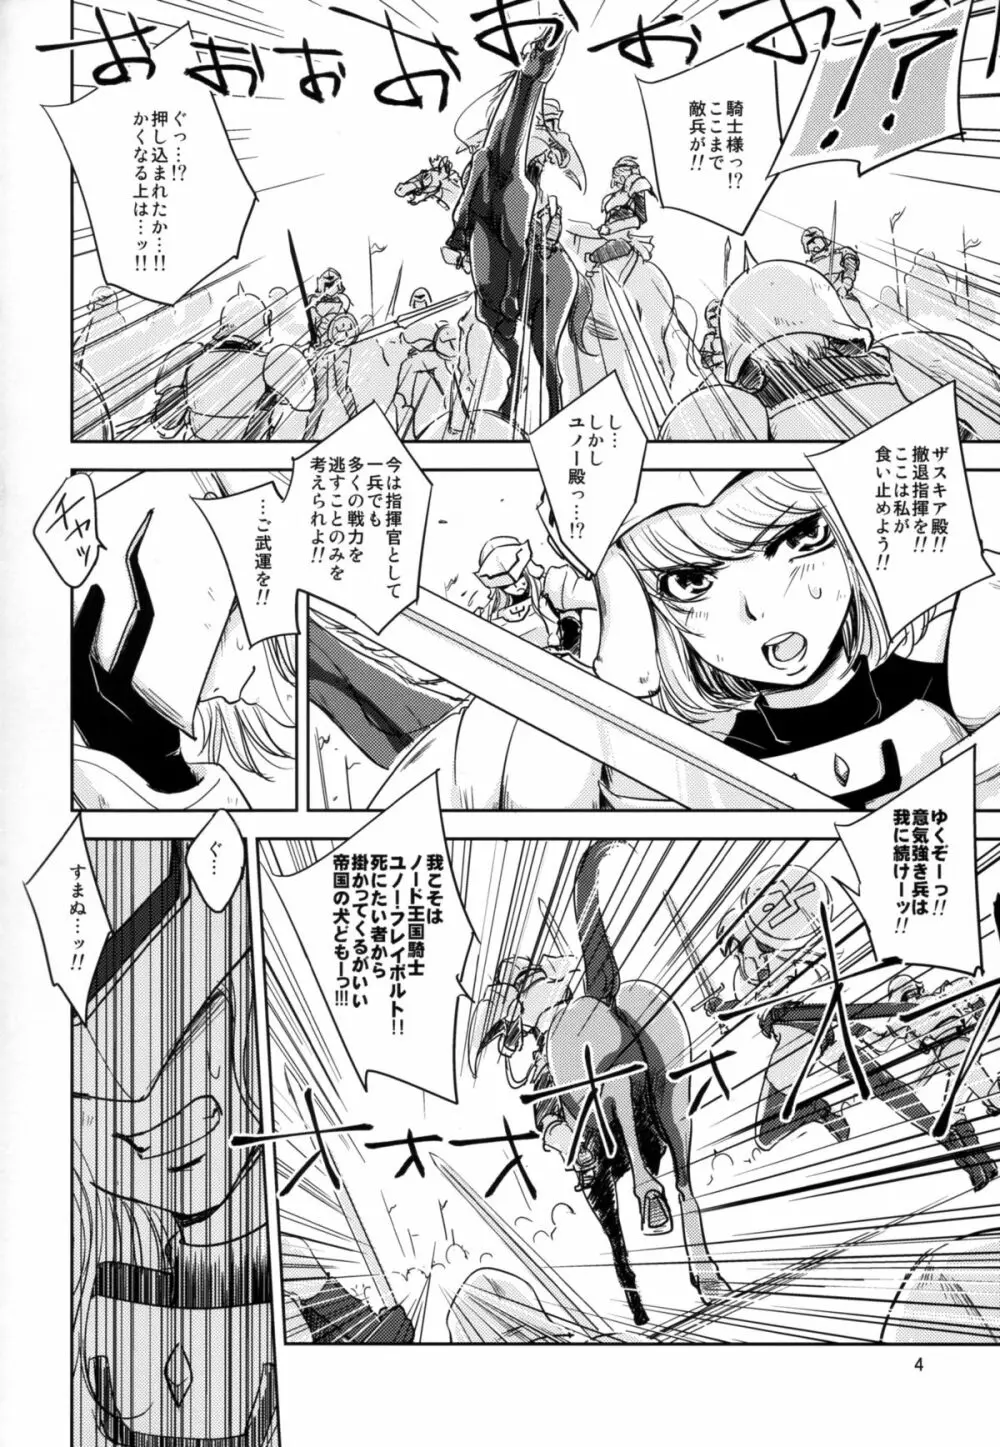 GRASSEN'S WAR ANOTHER STORY Ex #04 ノード侵攻 IV Page.4